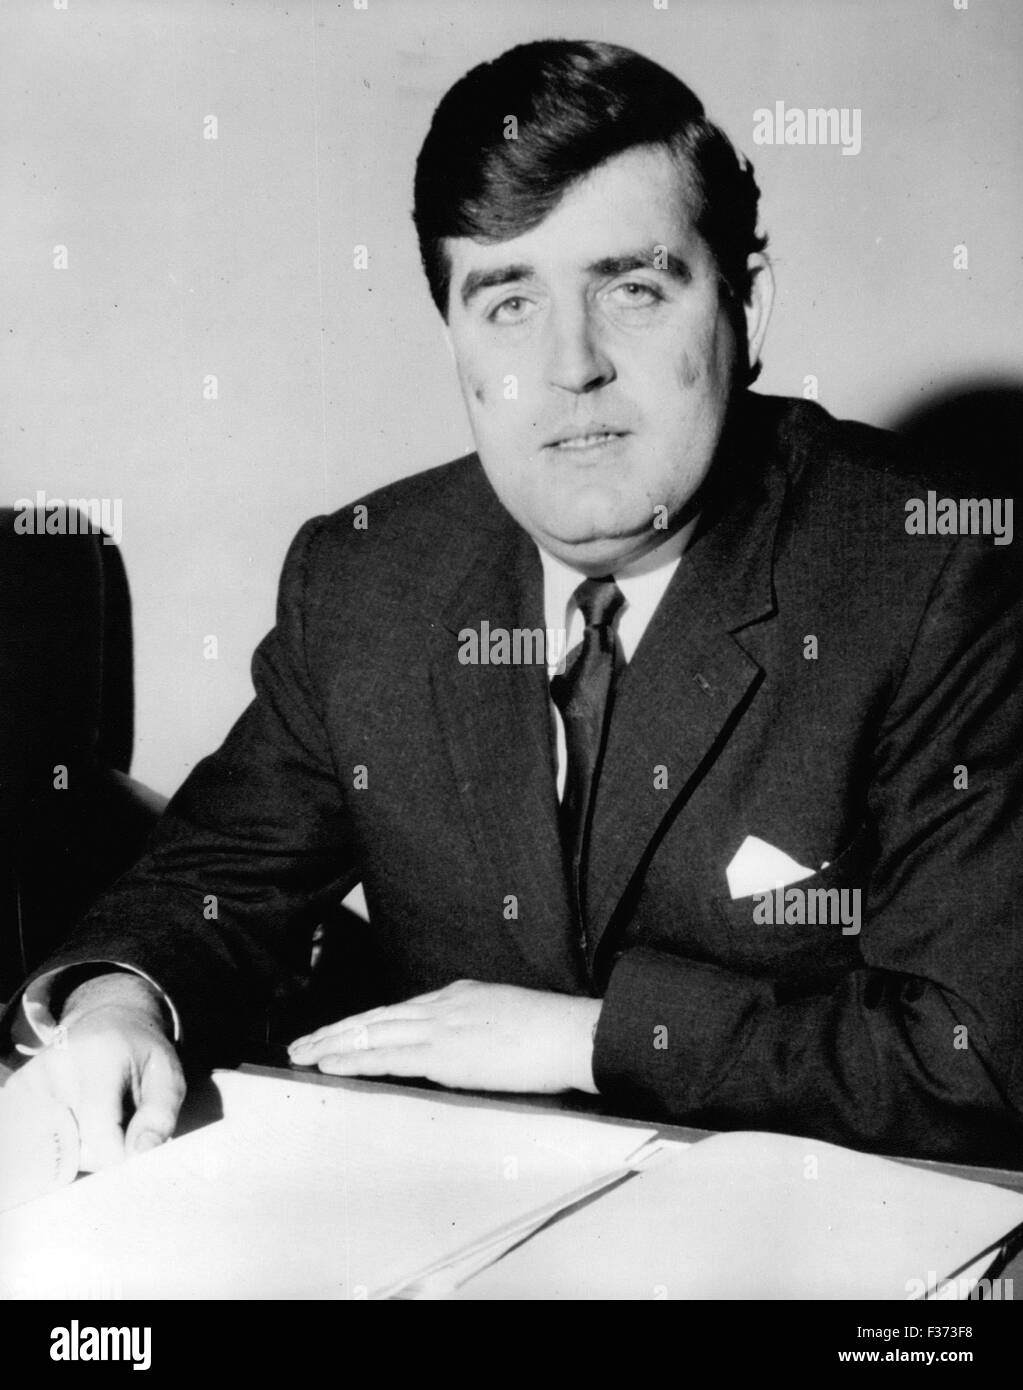 Jan. 03, 1967 - Ulster Government Rt Hon J D Taylor BSC Aminethe MP Minister of State Ministry of Finance and Chief Whip. (Credit Image: © Keystone Press Agency/Keystone USA via ZUMAPRESS.com) Stock Photo